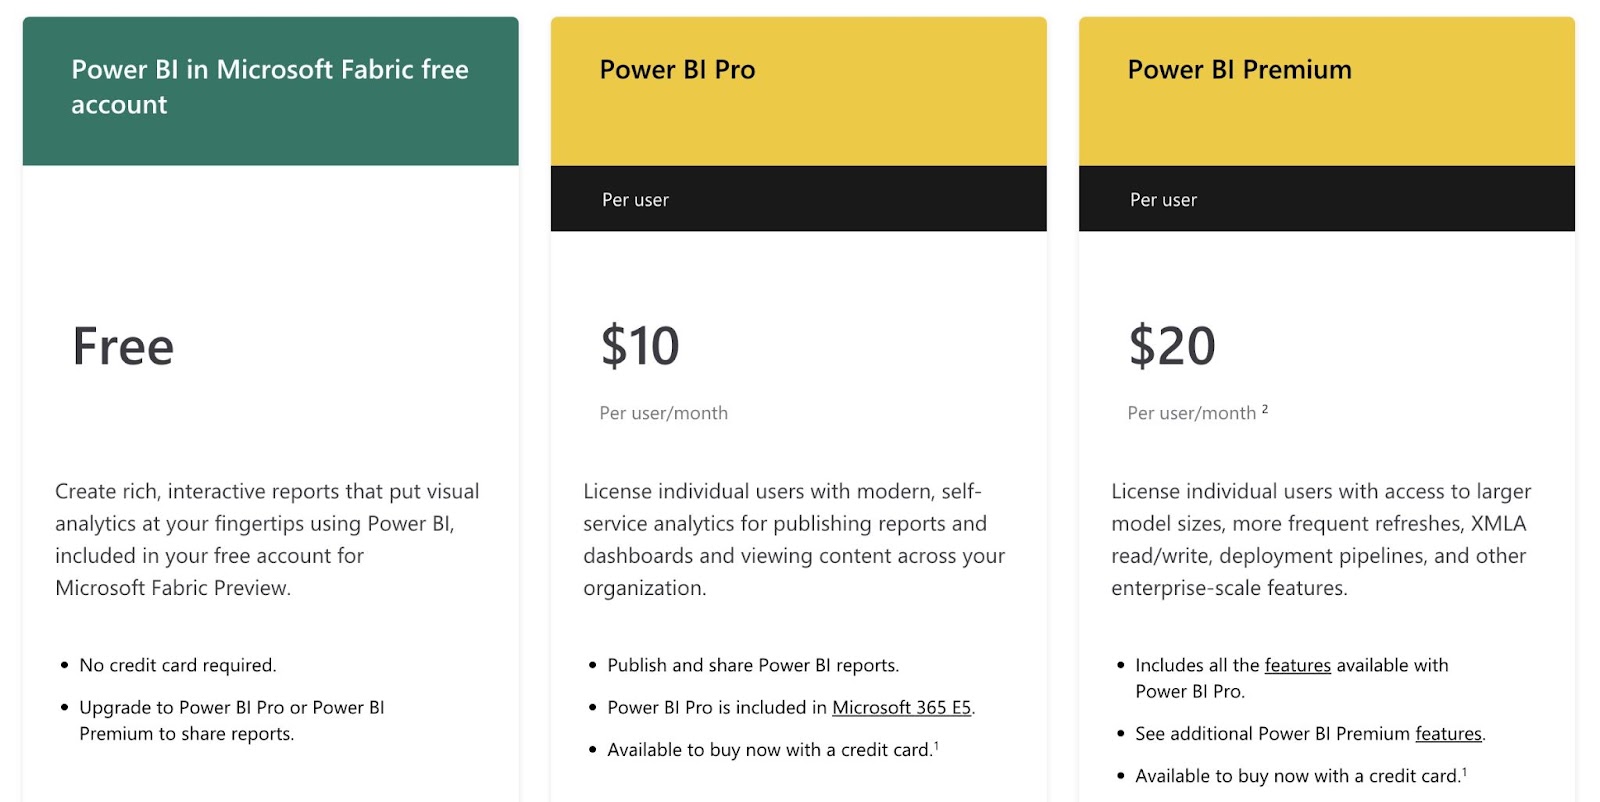 Pricing page on "Power BI" showing their three different plans along with the pricing & details for each.